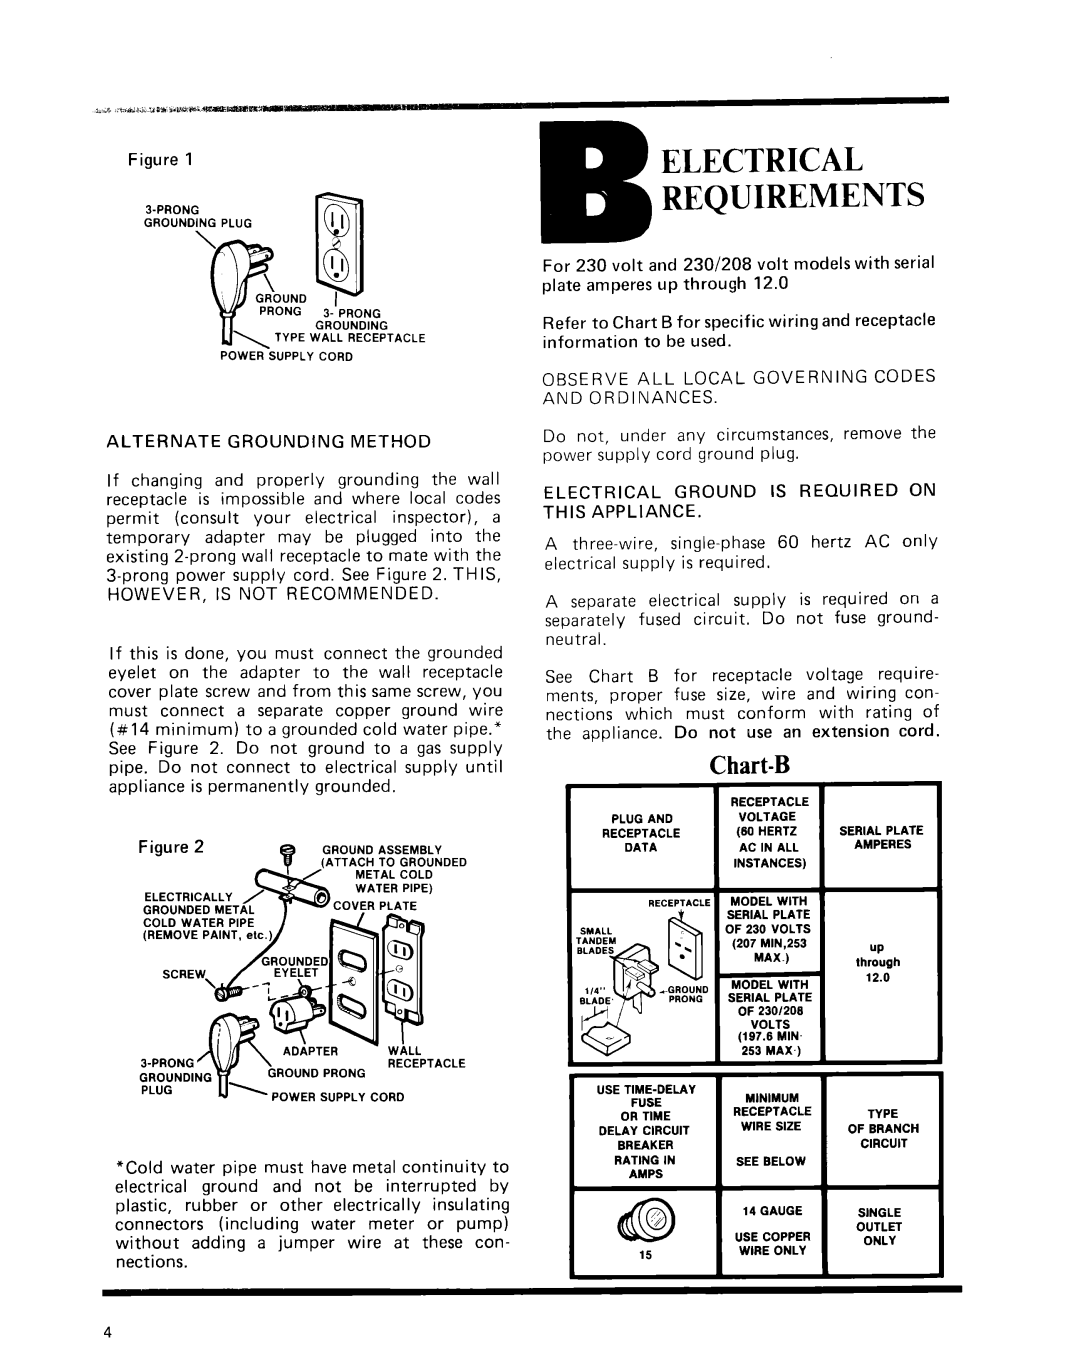 Whirlpool Air Conditioner manual Electrical B Requirements, Chart-B 